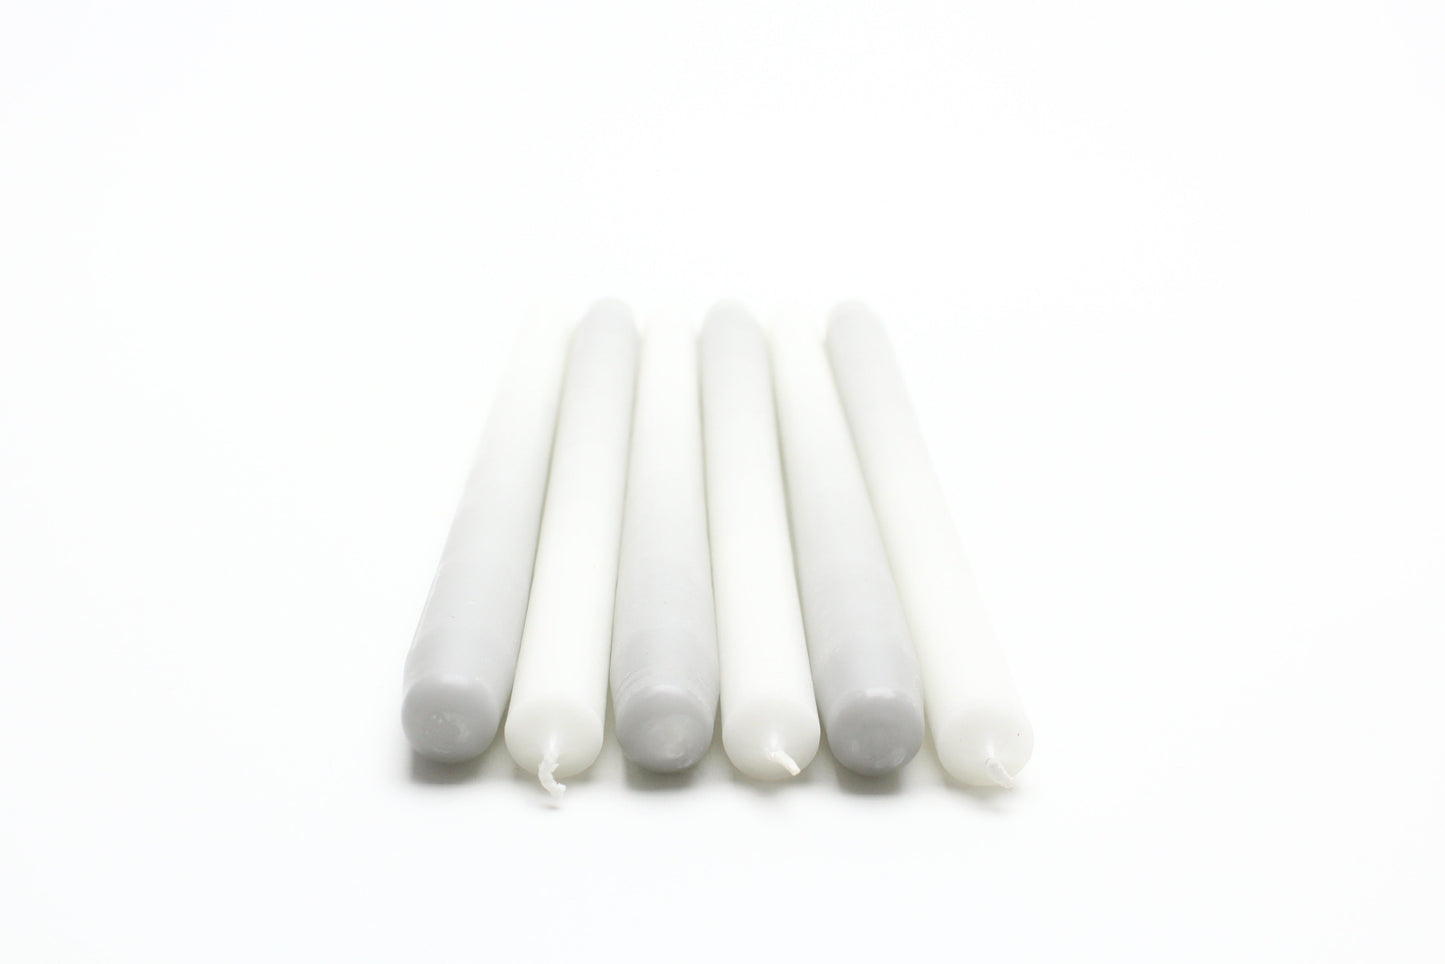 GRADIENT CANDLES | RAINY GREY (set of 6 in a gift box)